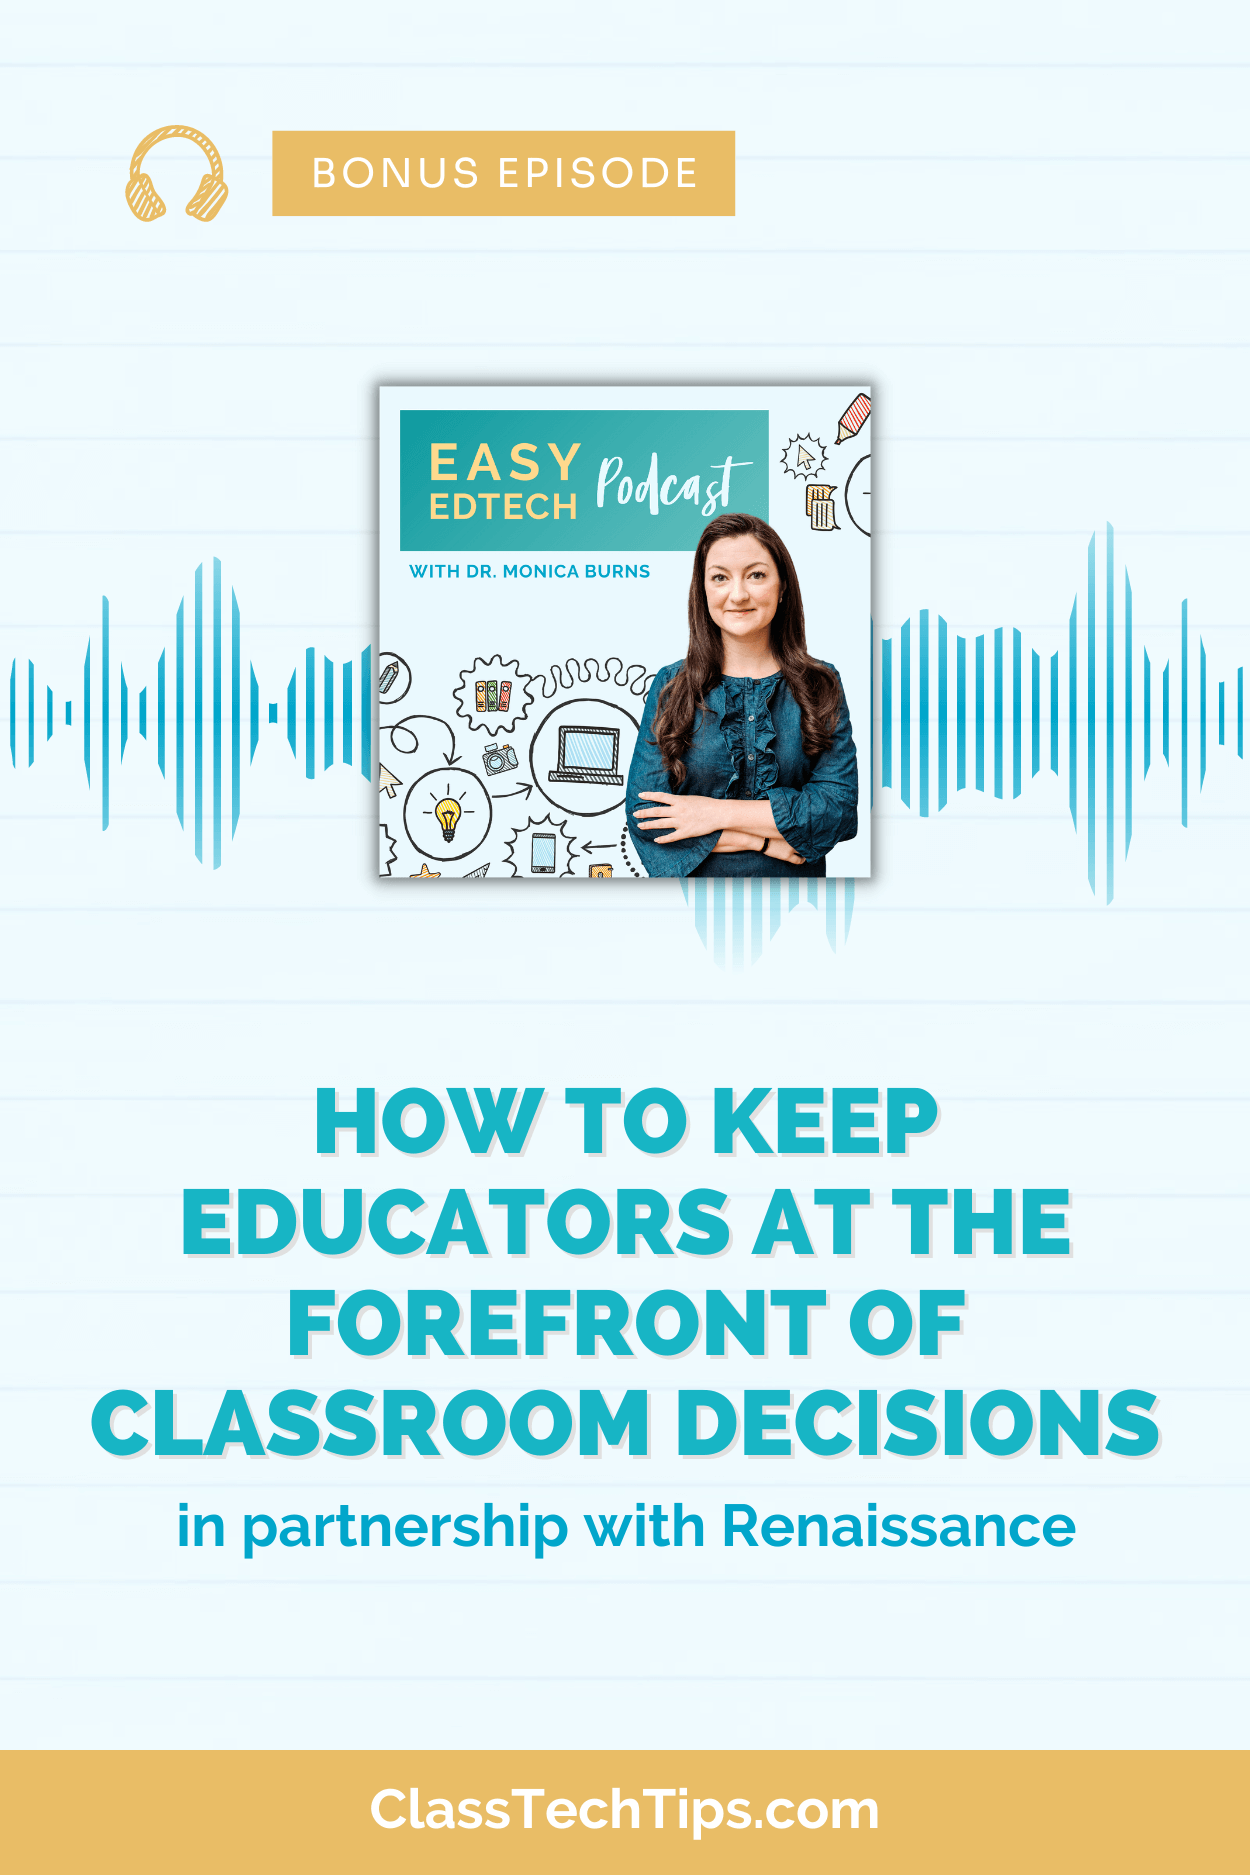 Featured image for a podcast episode with the podcast logo and blue soundwaves, focusing on empowering educators in classroom decision-making.